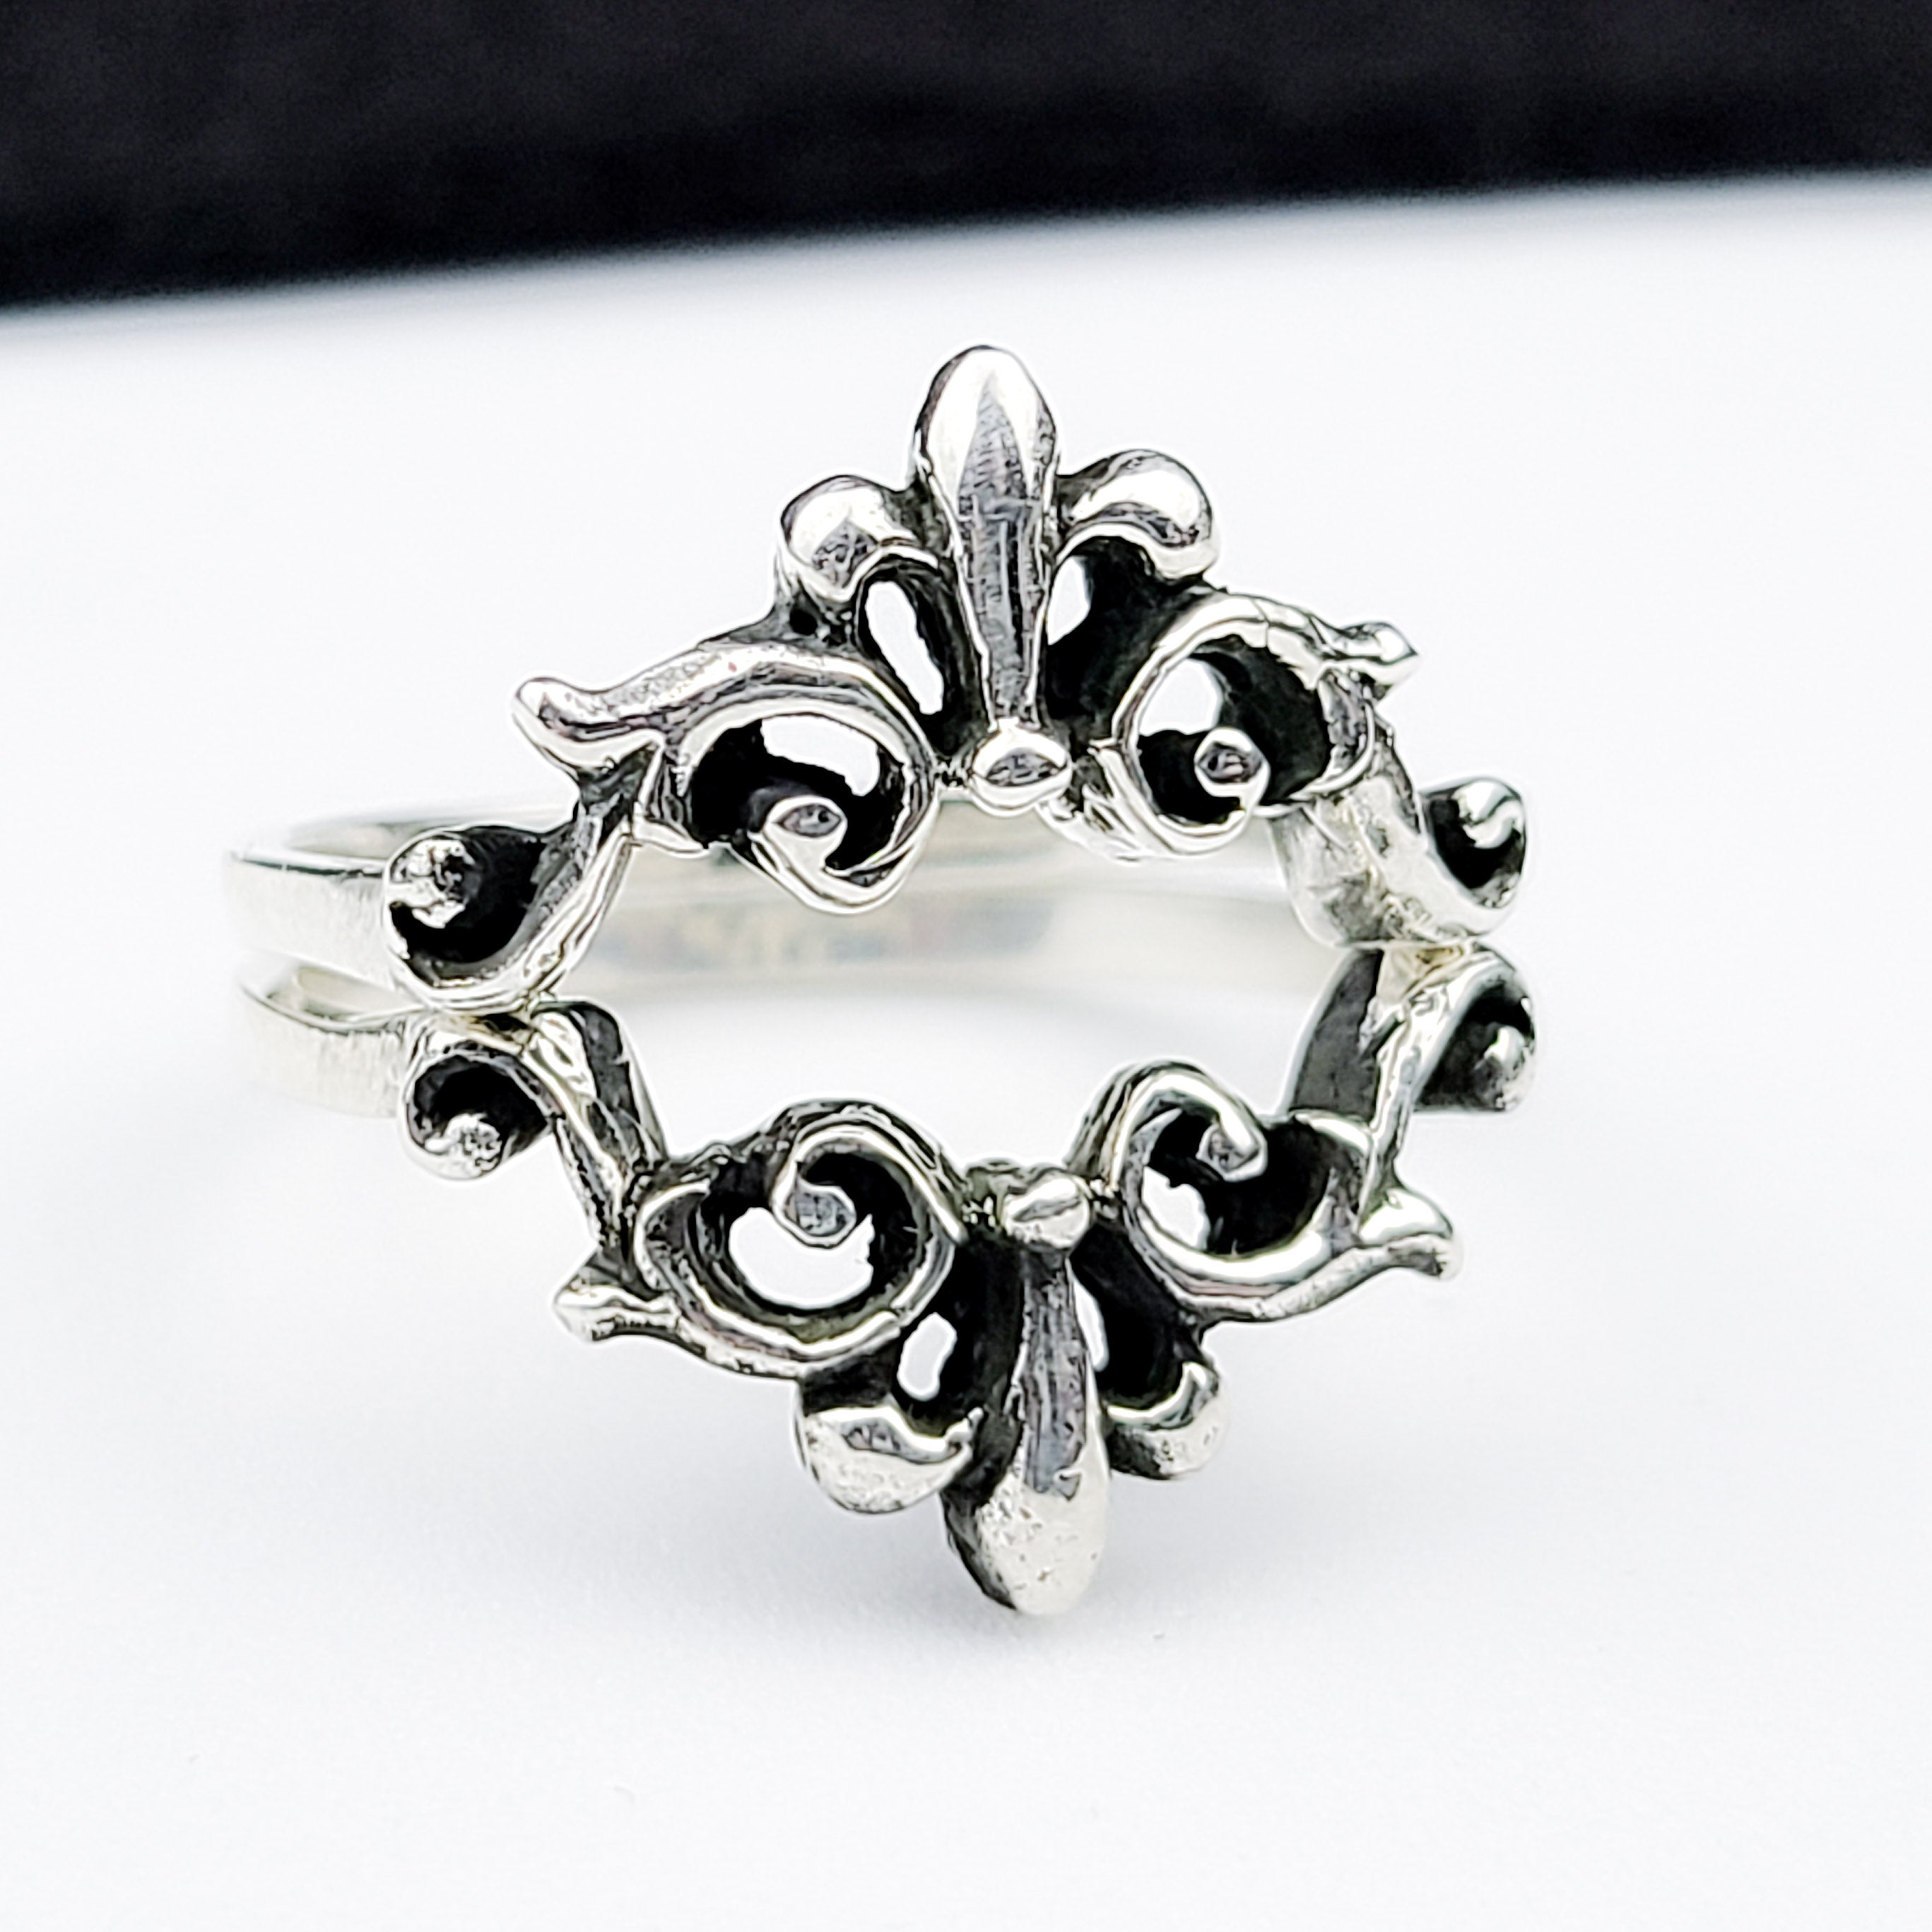 Silver Small Baroque Curves Lace Ring